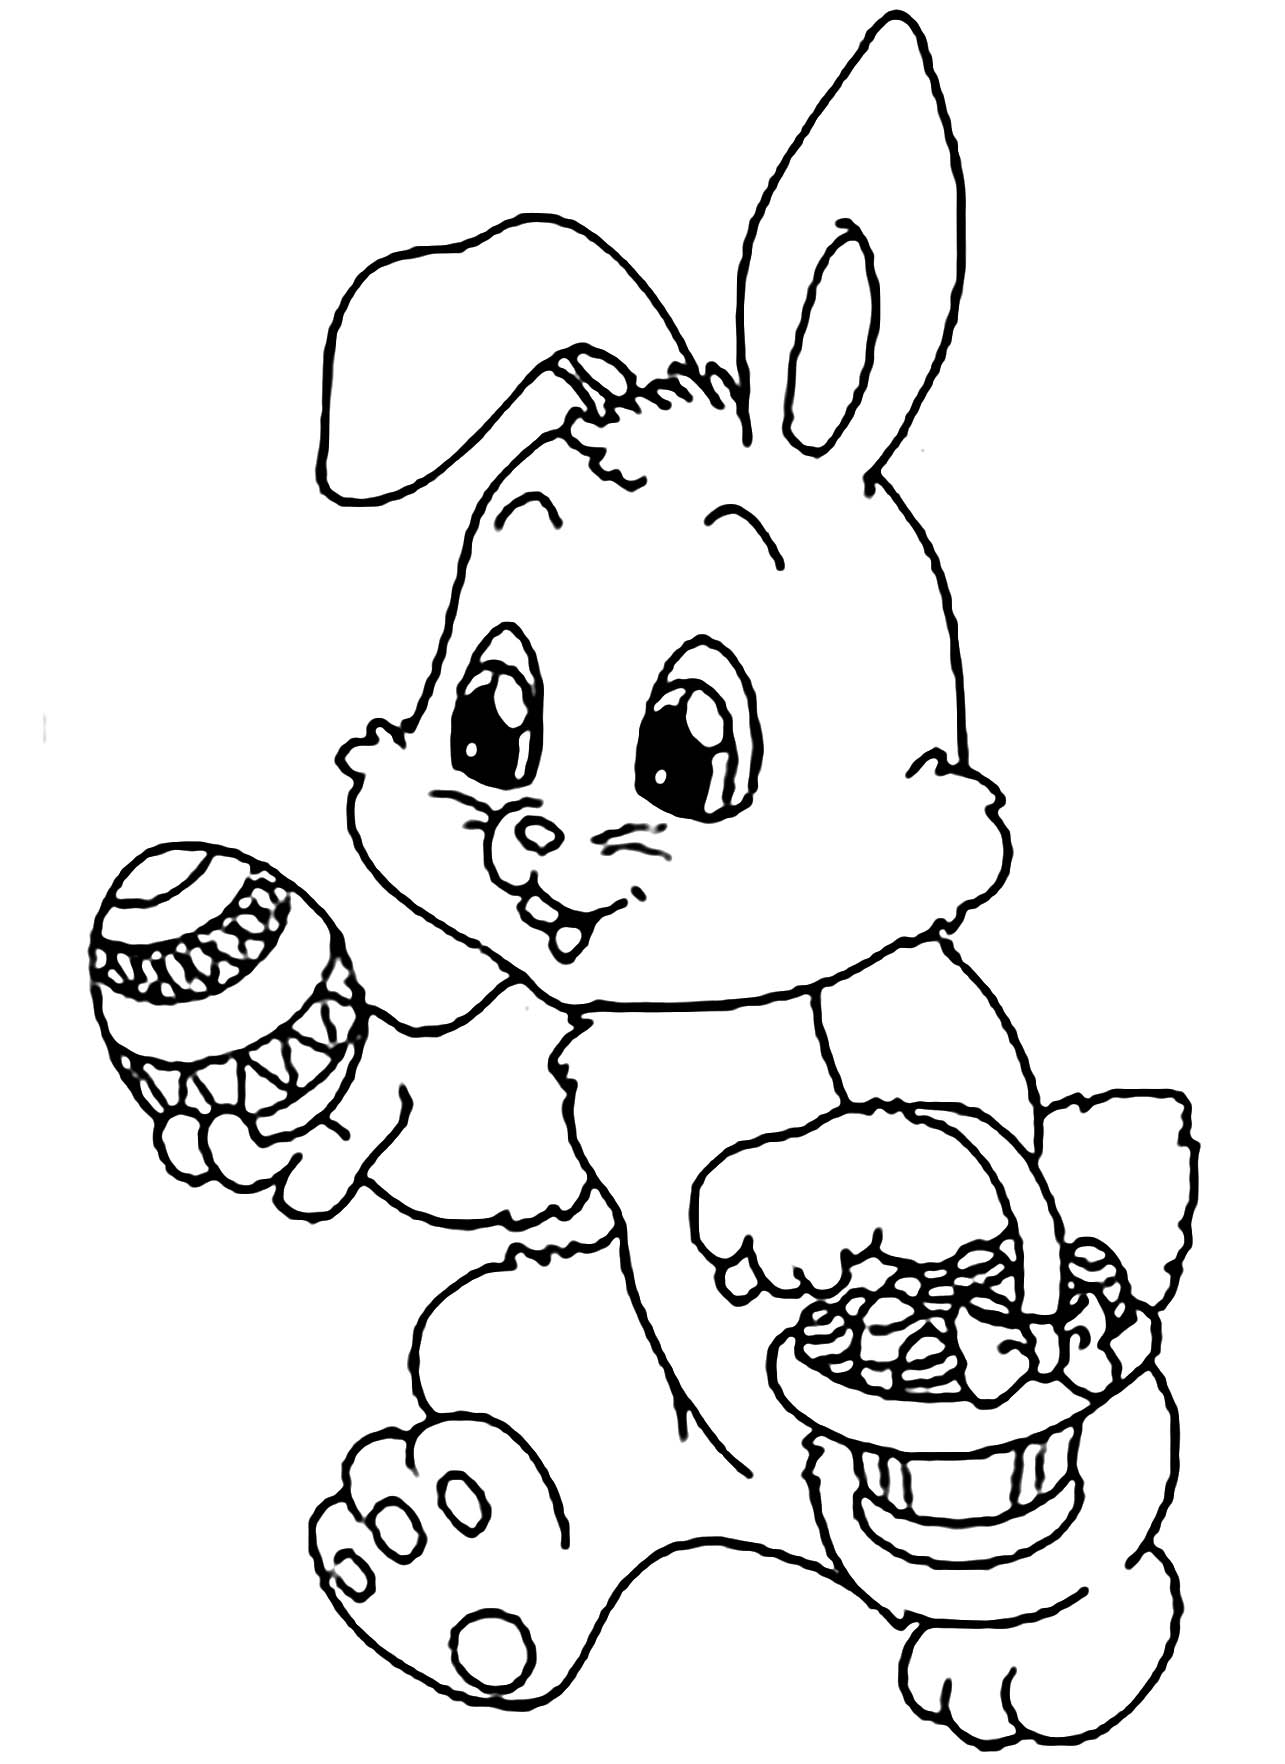 Rabbits Coloring Pages - Learny Kids